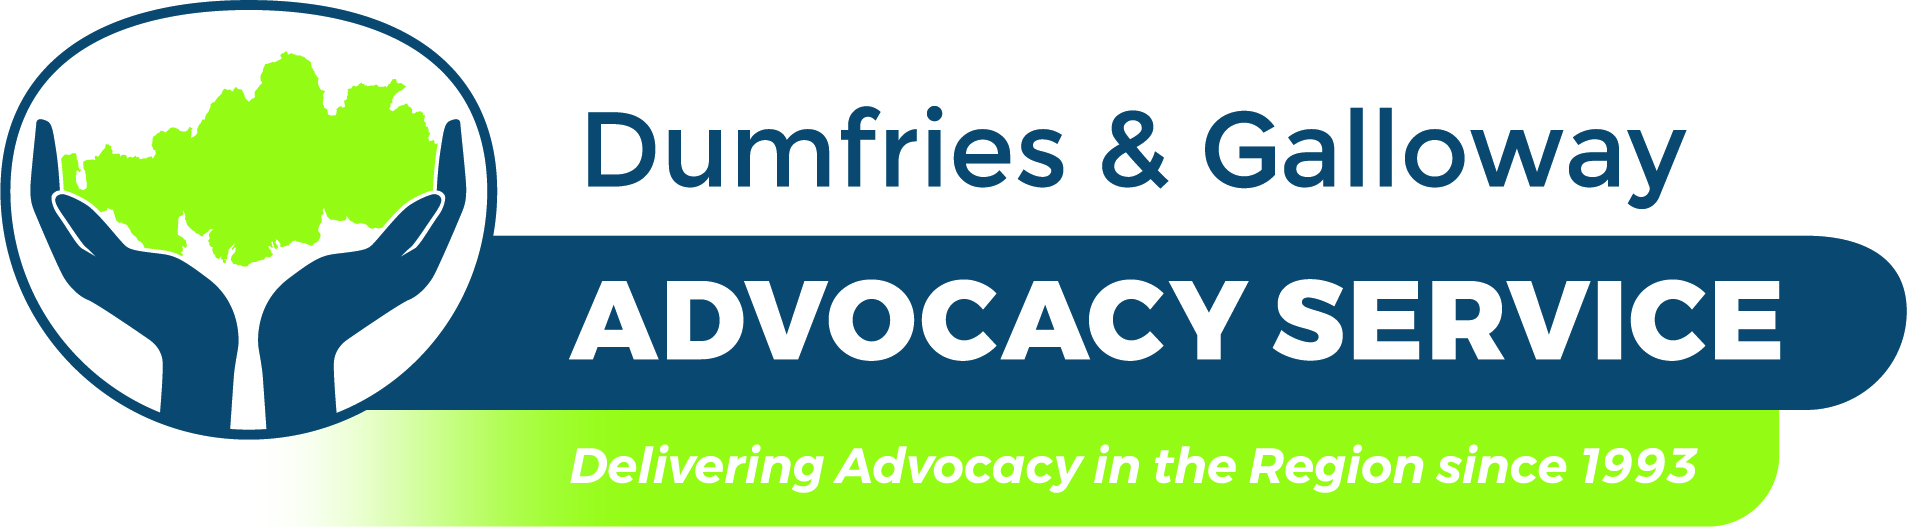 logo for Dumfries and Galloway Advocacy Service